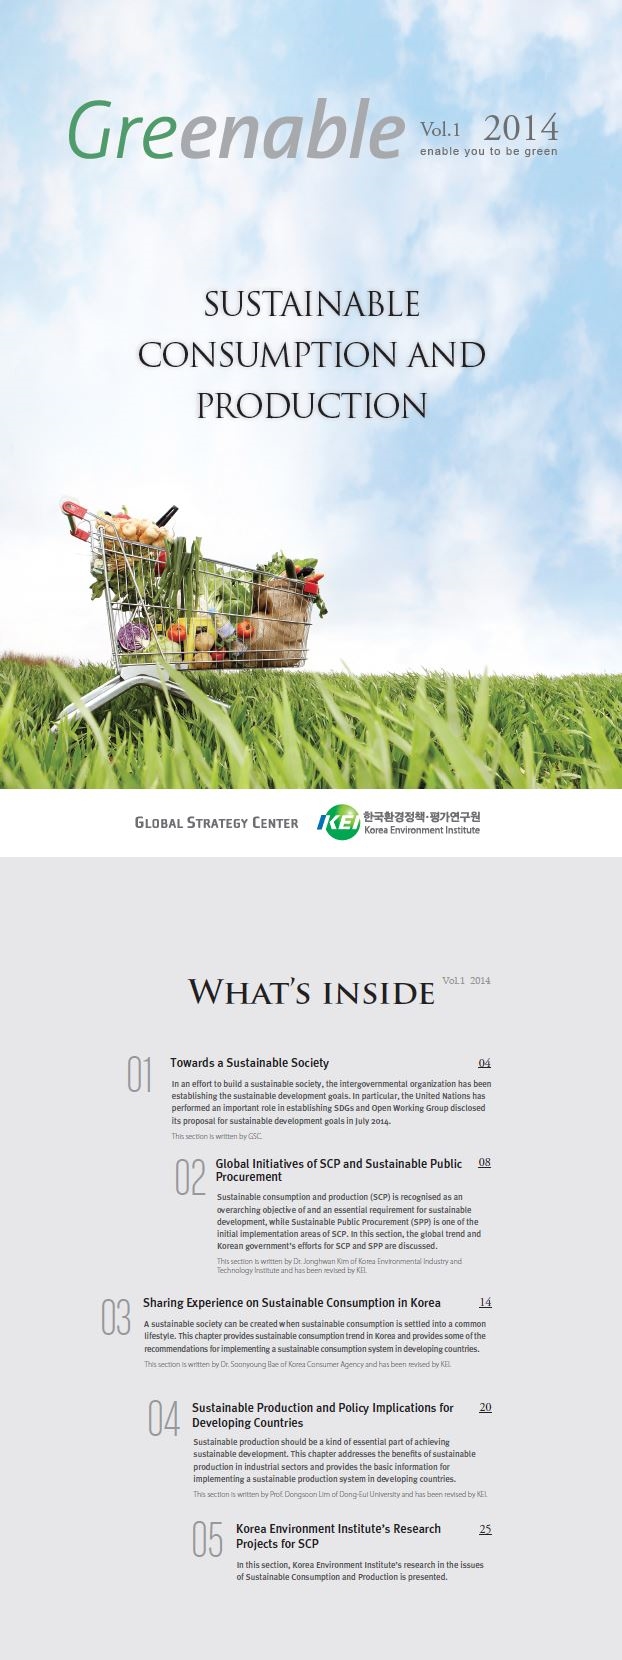 Greenable Vol.1 2014 Sustainable consumption and Production  / 자세한 내용은 아래의 PDF를 확인해주세요